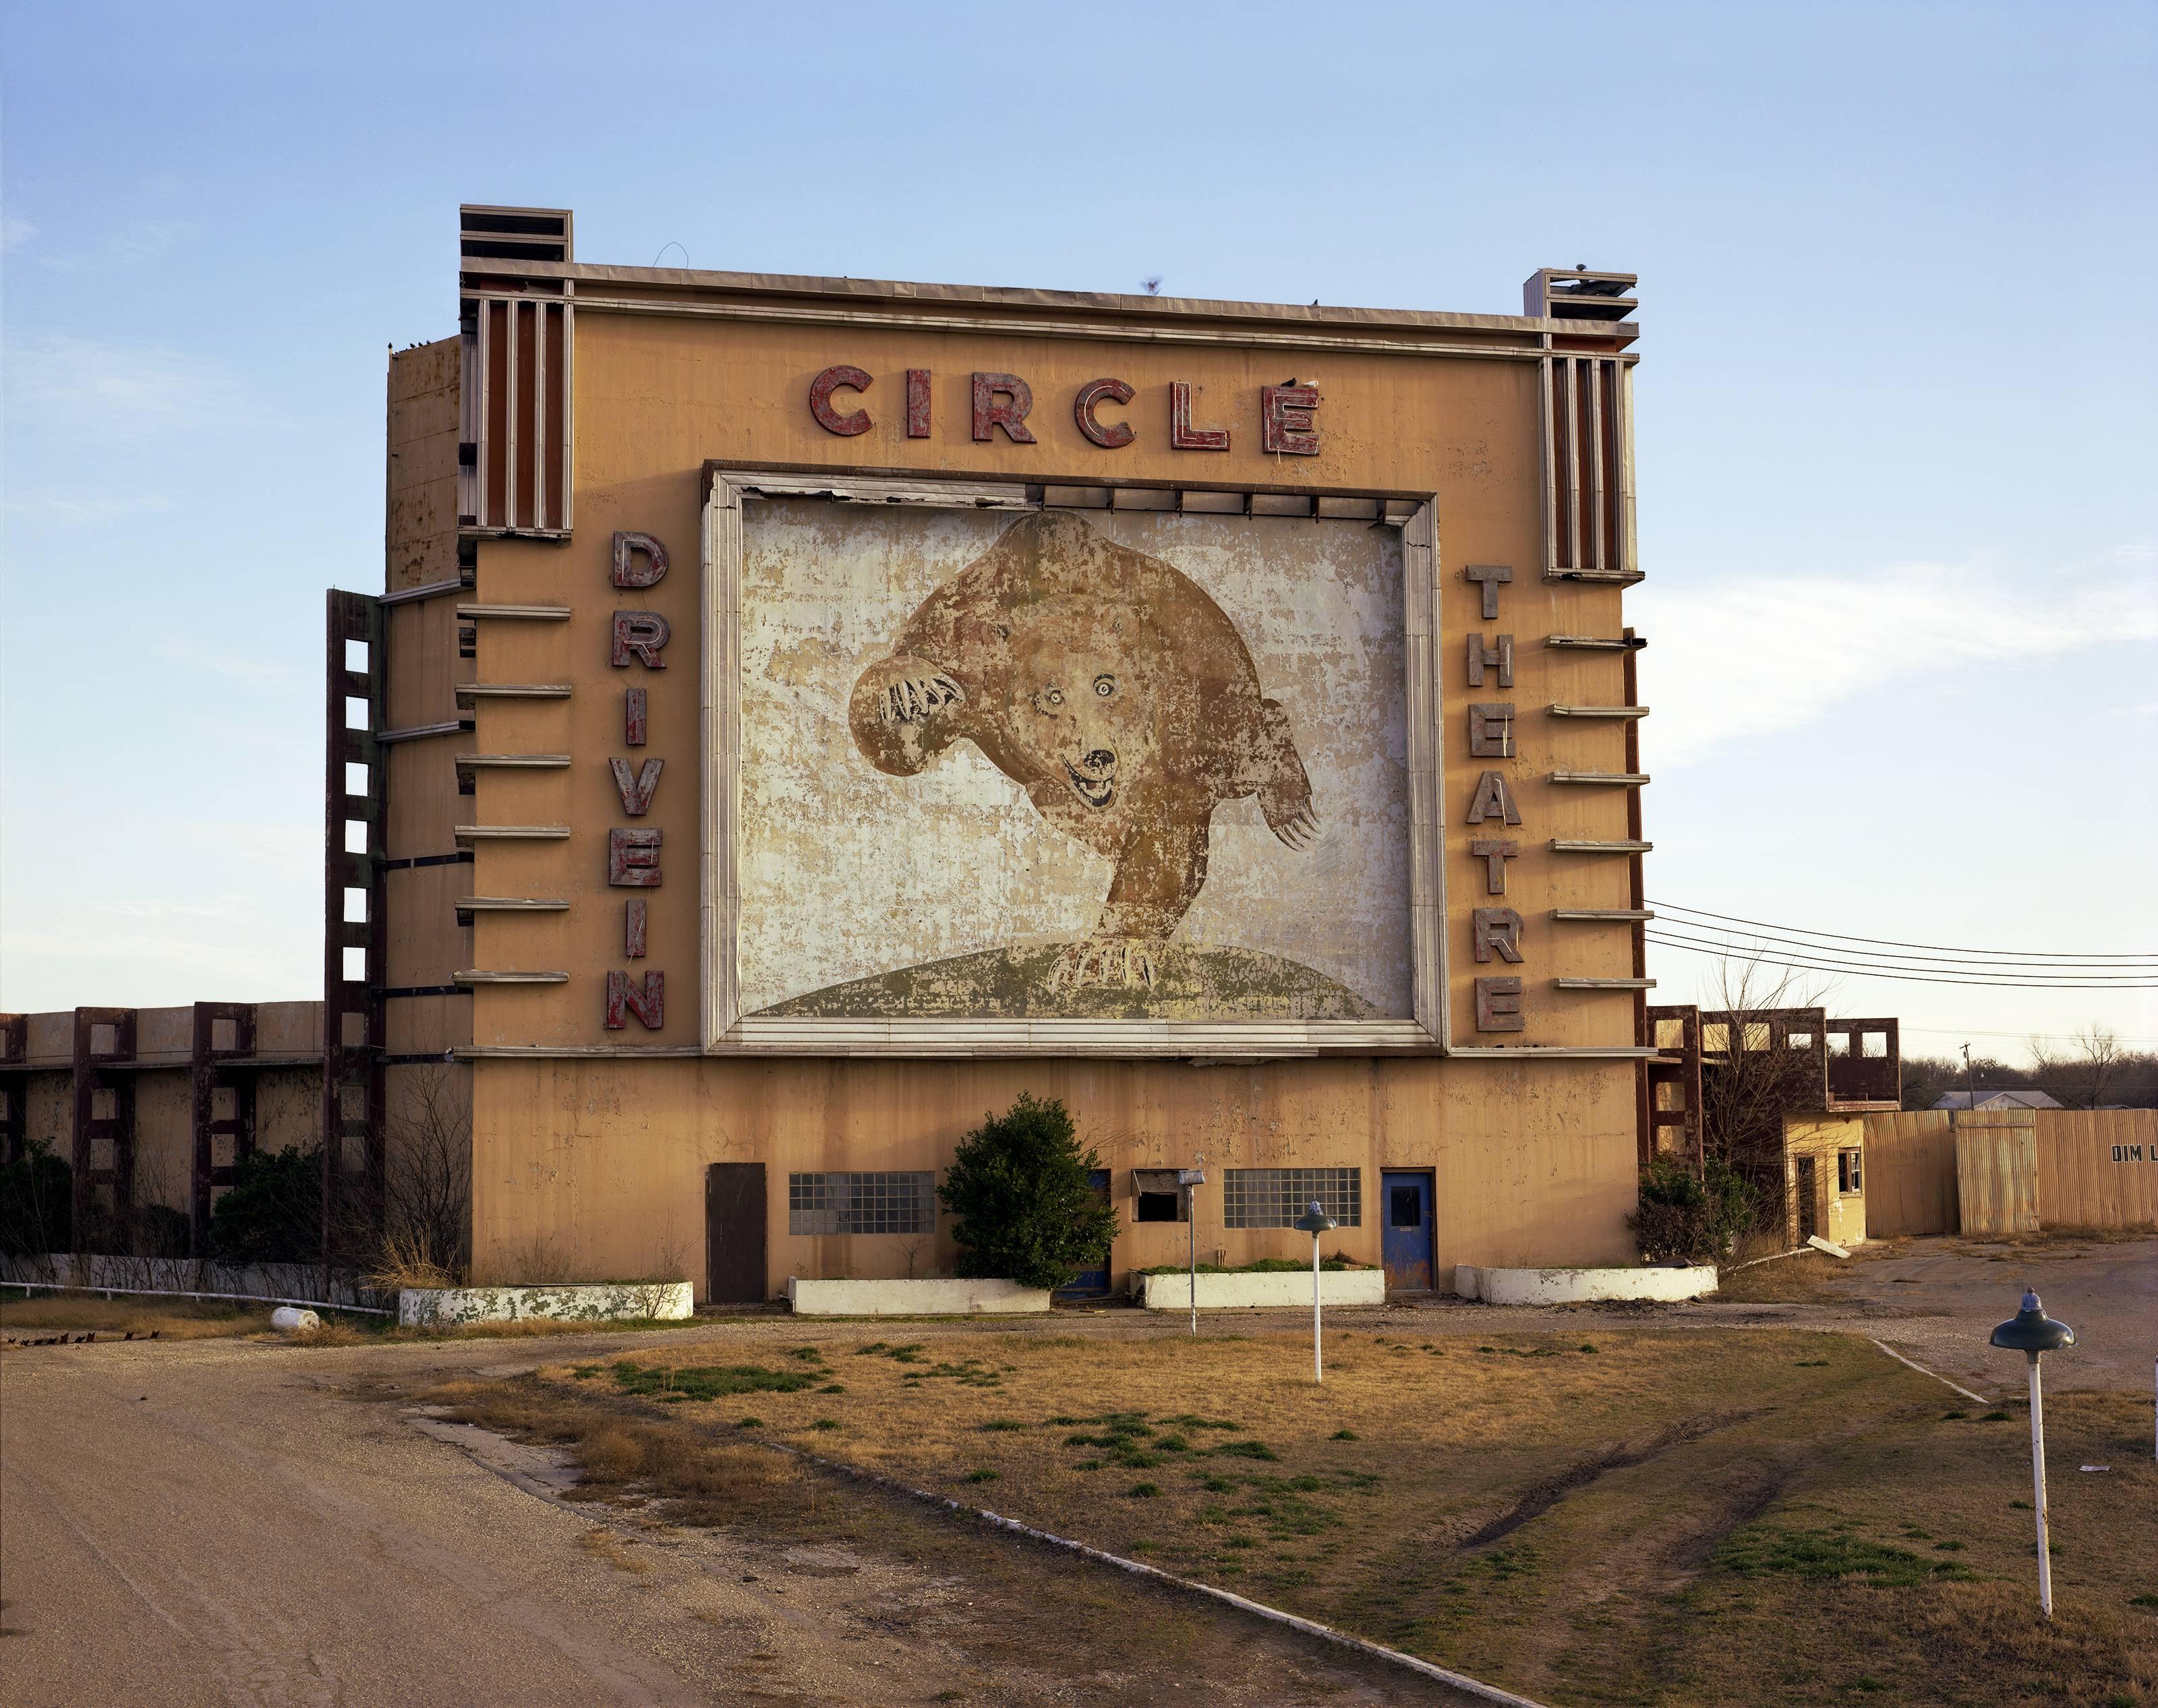 Steve Fitch Landscape Photograph - Circle Drive-in theater, Waco, Texas; January 7, 1981